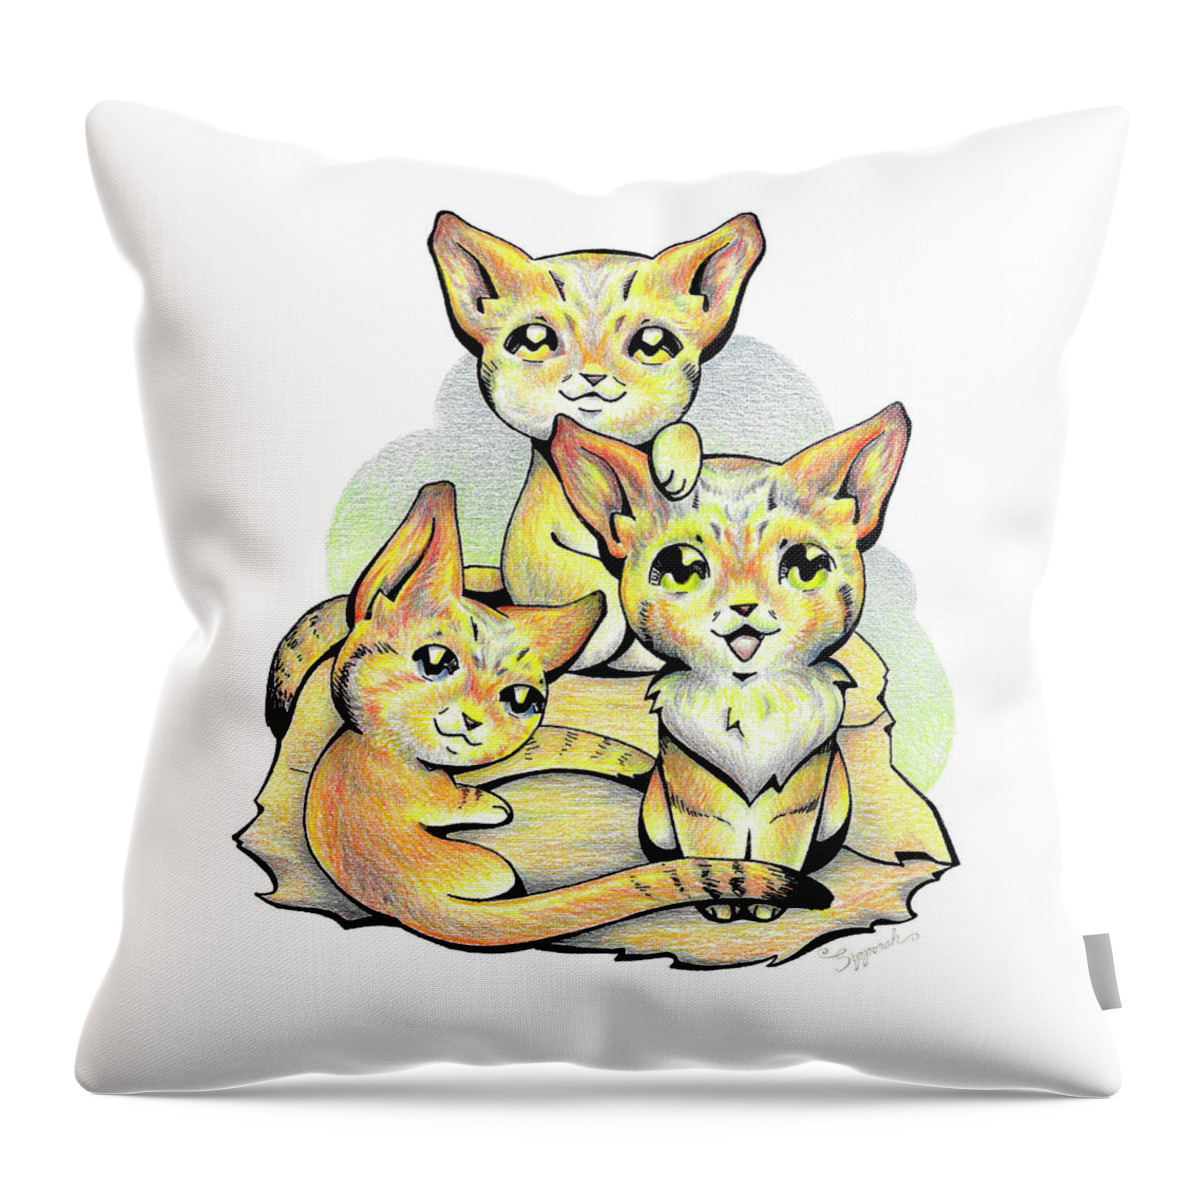 Cat Throw Pillow featuring the drawing Endangered Animal Sand Cat by Sipporah Art and Illustration